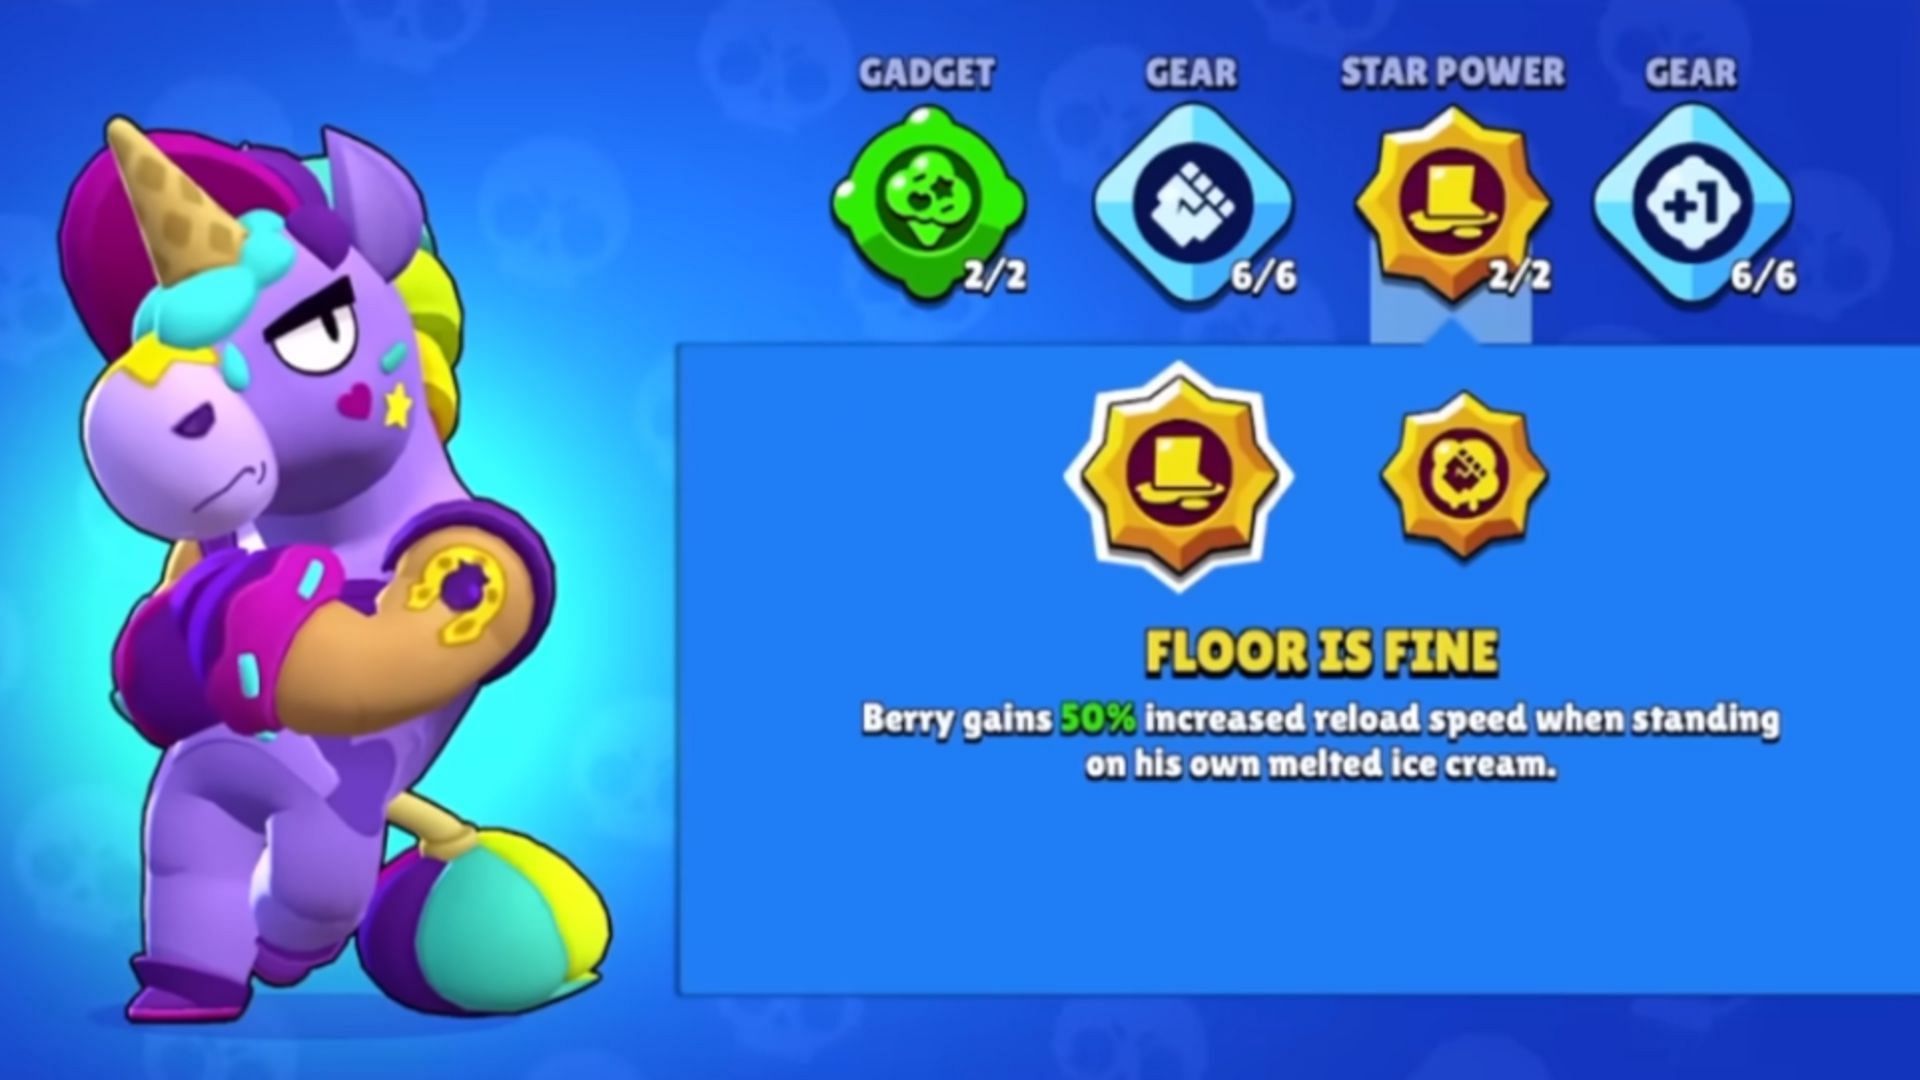 The floor is Fine Star Power (Image via Supercell)